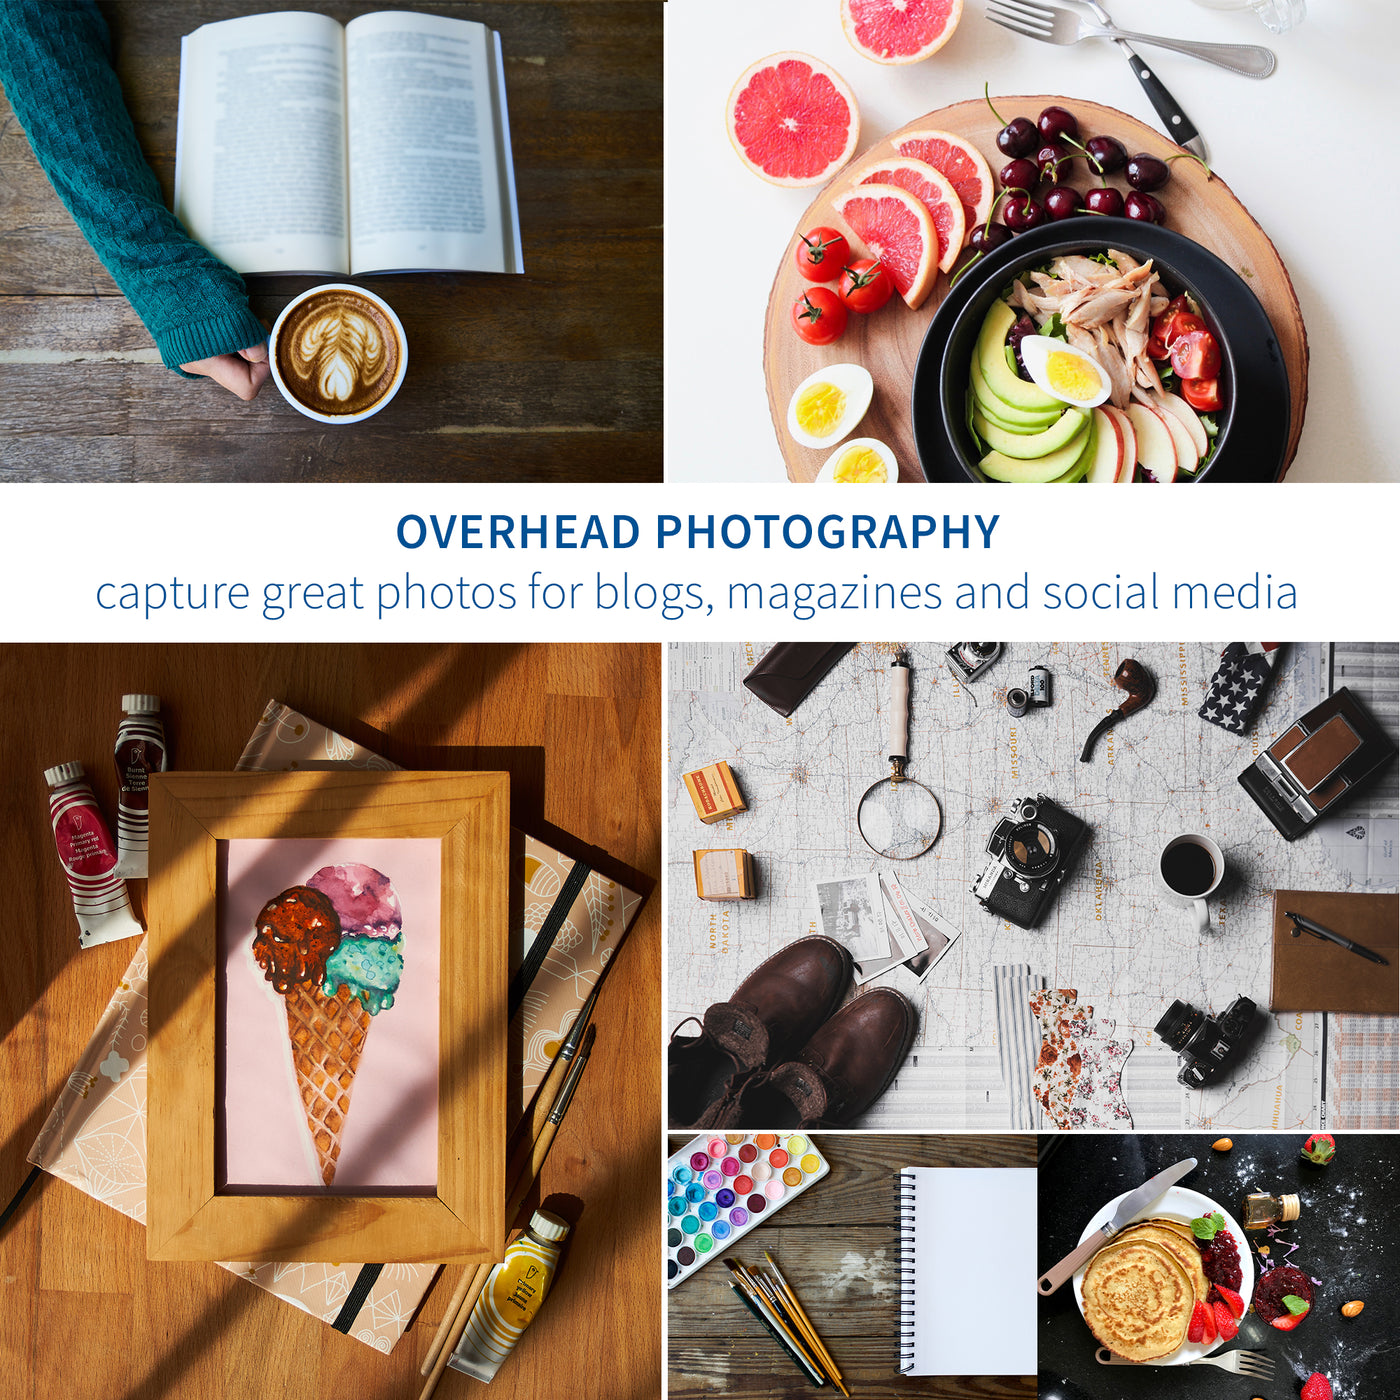 Overhead photography is made easy when shooting content.